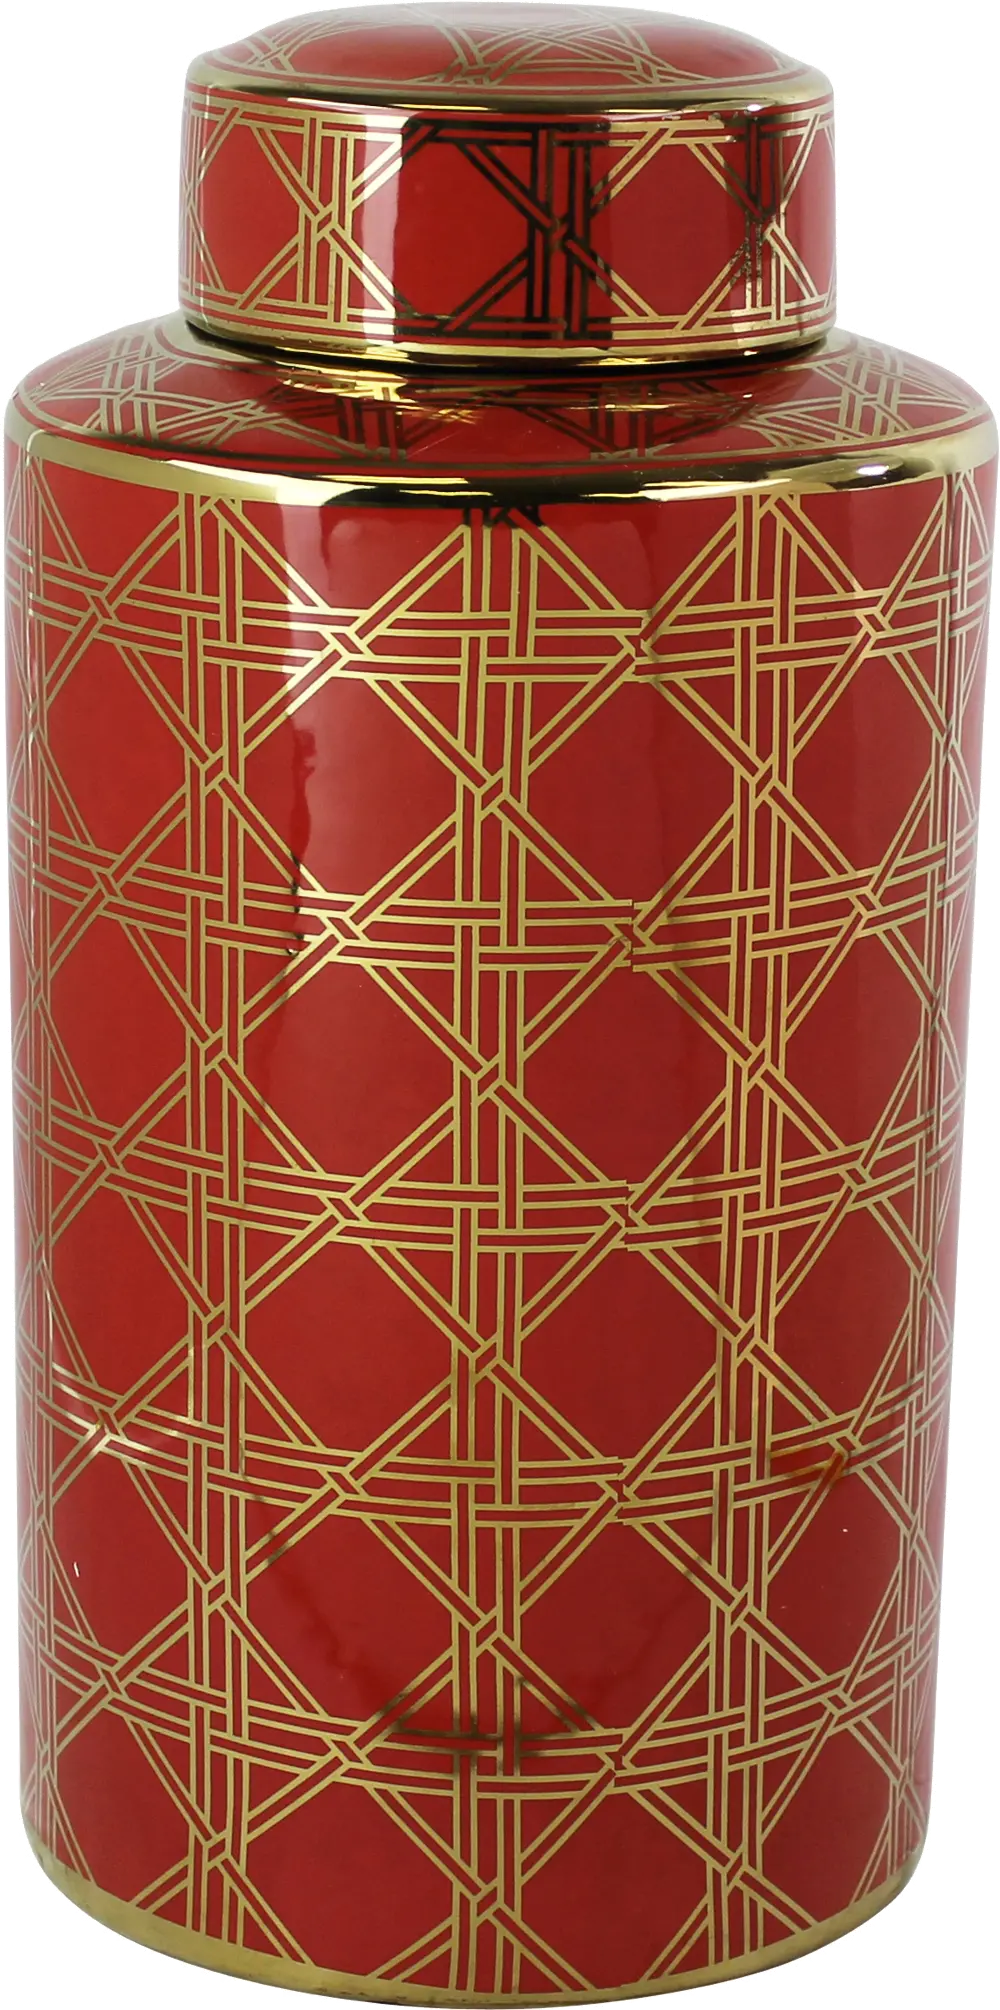 16 Inch Red and Gold Ceramic Lidded Jar-1